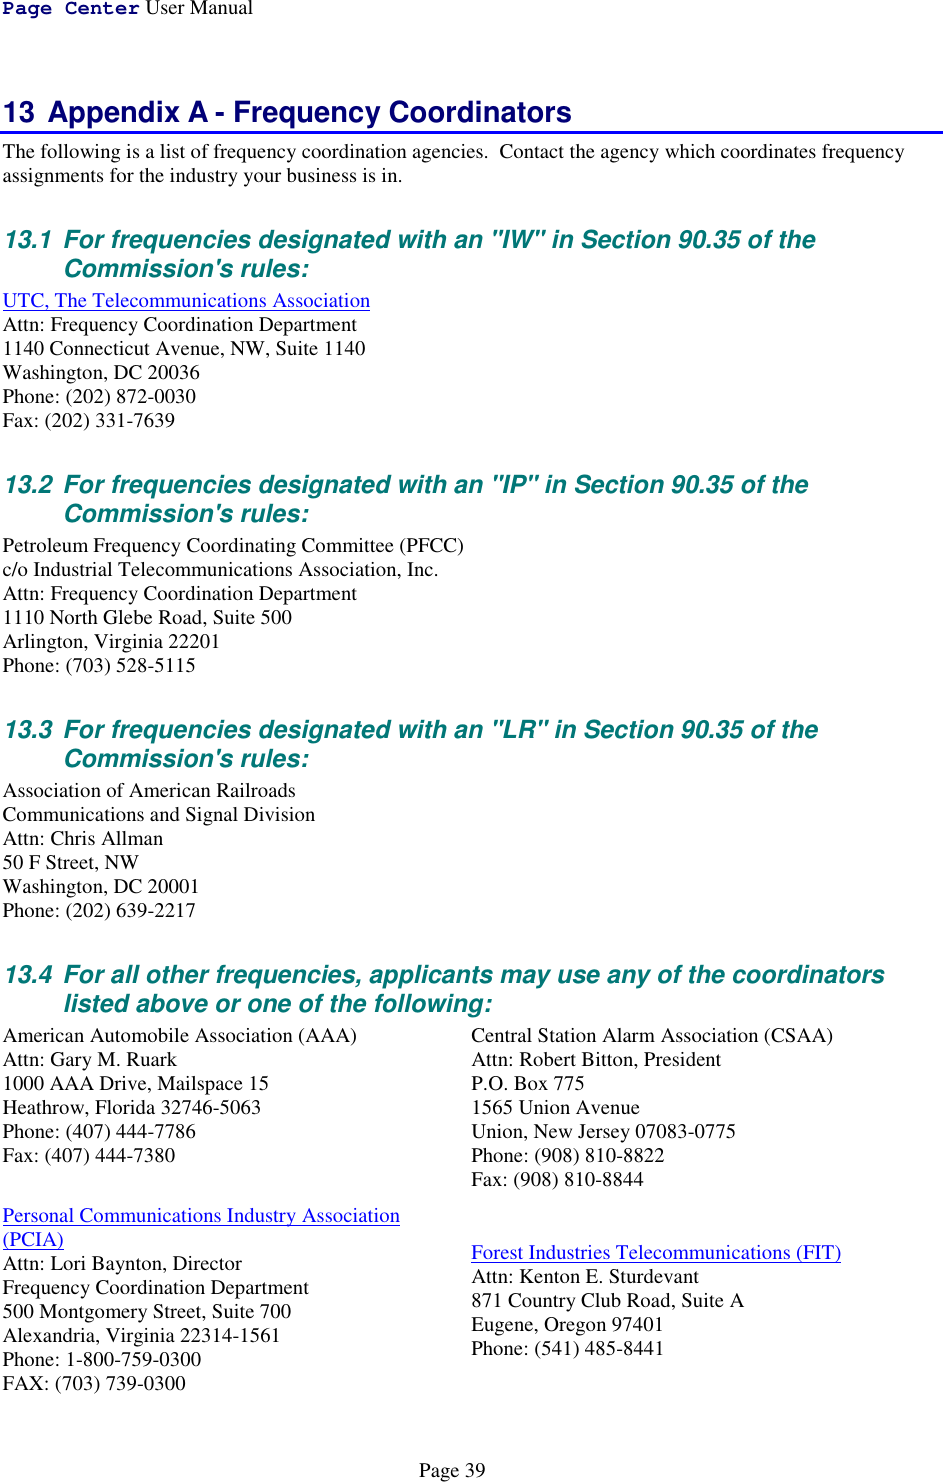 Page Center User ManualPage 3913 Appendix A - Frequency CoordinatorsThe following is a list of frequency coordination agencies.  Contact the agency which coordinates frequencyassignments for the industry your business is in.13.1  For frequencies designated with an &quot;IW&quot; in Section 90.35 of theCommission&apos;s rules:UTC, The Telecommunications AssociationAttn: Frequency Coordination Department1140 Connecticut Avenue, NW, Suite 1140Washington, DC 20036Phone: (202) 872-0030Fax: (202) 331-763913.2  For frequencies designated with an &quot;IP&quot; in Section 90.35 of theCommission&apos;s rules:Petroleum Frequency Coordinating Committee (PFCC)c/o Industrial Telecommunications Association, Inc.Attn: Frequency Coordination Department1110 North Glebe Road, Suite 500Arlington, Virginia 22201Phone: (703) 528-511513.3  For frequencies designated with an &quot;LR&quot; in Section 90.35 of theCommission&apos;s rules:Association of American RailroadsCommunications and Signal DivisionAttn: Chris Allman50 F Street, NWWashington, DC 20001Phone: (202) 639-221713.4  For all other frequencies, applicants may use any of the coordinatorslisted above or one of the following:American Automobile Association (AAA)Attn: Gary M. Ruark1000 AAA Drive, Mailspace 15Heathrow, Florida 32746-5063Phone: (407) 444-7786Fax: (407) 444-7380Personal Communications Industry Association(PCIA)Attn: Lori Baynton, DirectorFrequency Coordination Department500 Montgomery Street, Suite 700Alexandria, Virginia 22314-1561Phone: 1-800-759-0300FAX: (703) 739-0300Central Station Alarm Association (CSAA)Attn: Robert Bitton, PresidentP.O. Box 7751565 Union AvenueUnion, New Jersey 07083-0775Phone: (908) 810-8822Fax: (908) 810-8844Forest Industries Telecommunications (FIT)Attn: Kenton E. Sturdevant871 Country Club Road, Suite AEugene, Oregon 97401Phone: (541) 485-8441